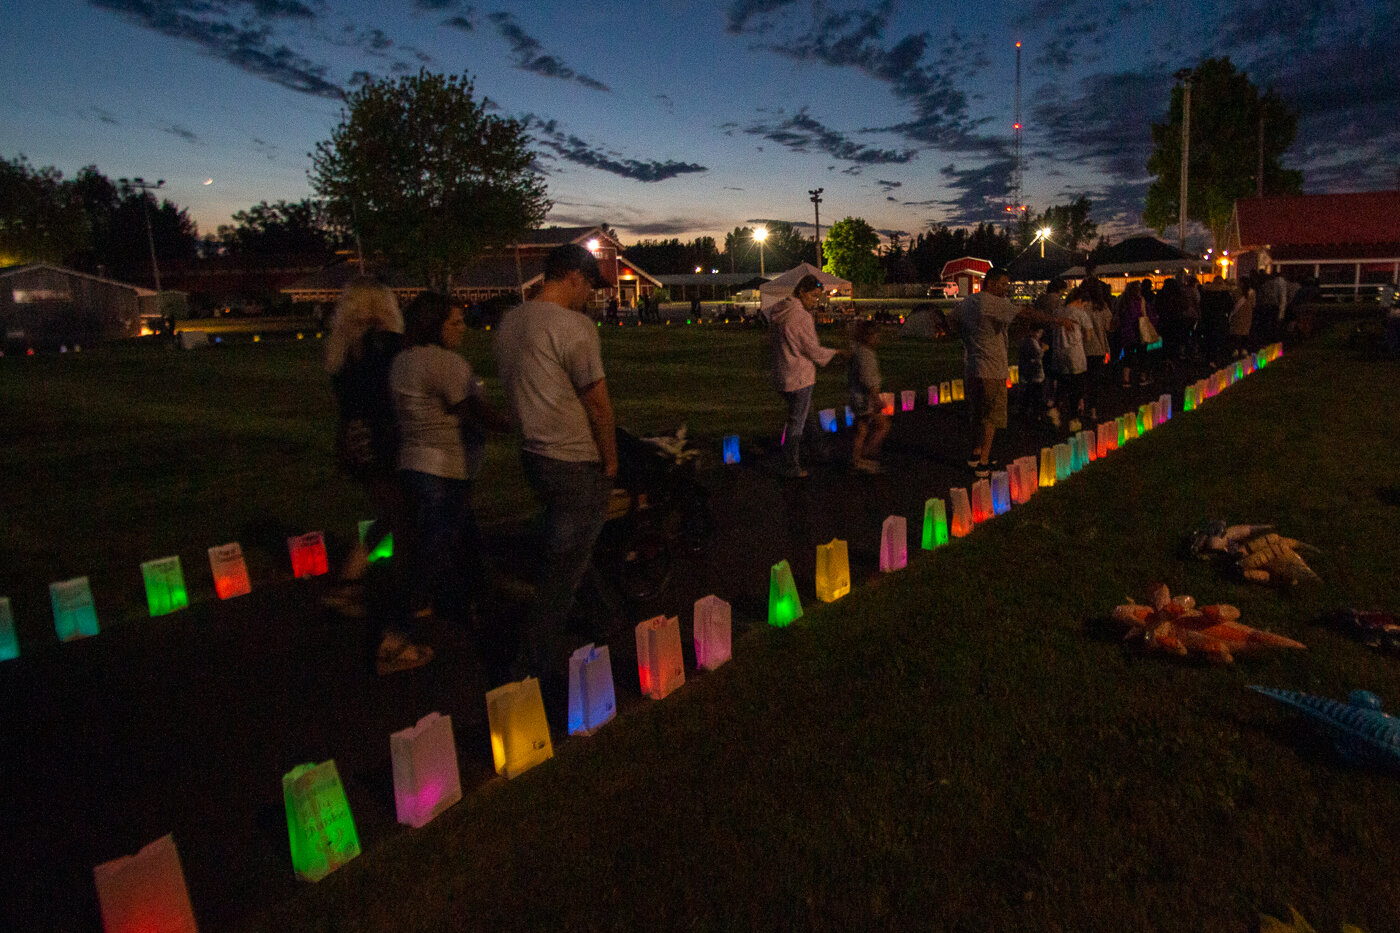 Relay for Life attendees begin the final event of the night at the American Cancer Society's Relay for Life, the luminaria walk. The names of those who lost their lives to cancer, those who survived as well as some still currently fighting were on the Luminaria.